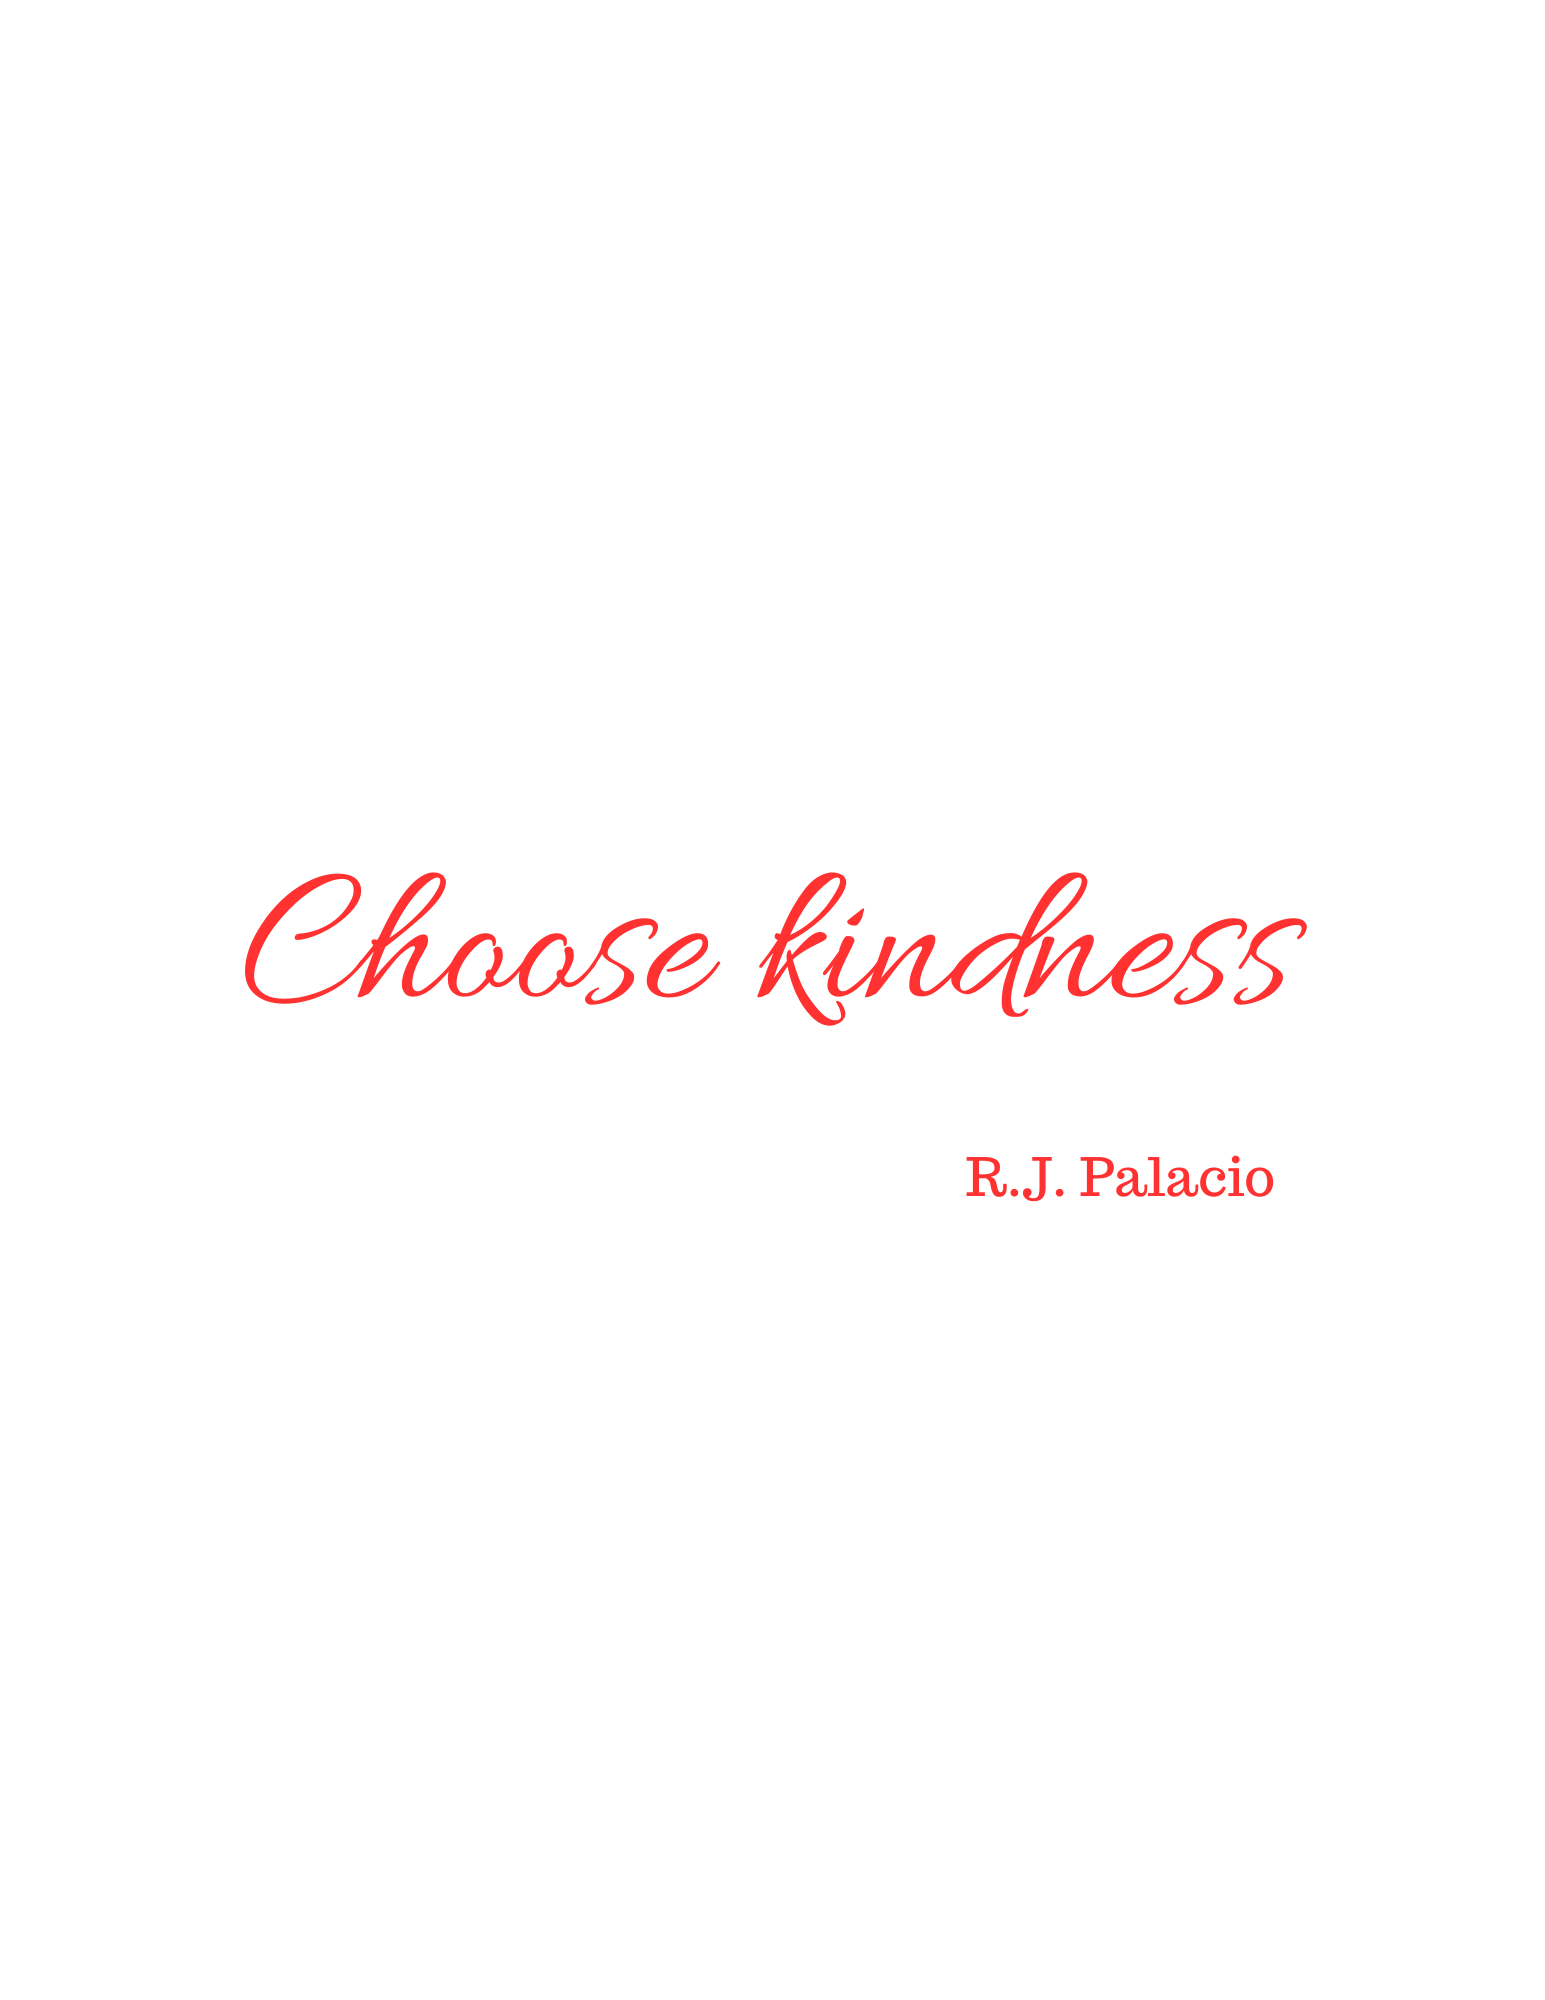 Choose kindness - a short kindness quote by R.J. Palacio